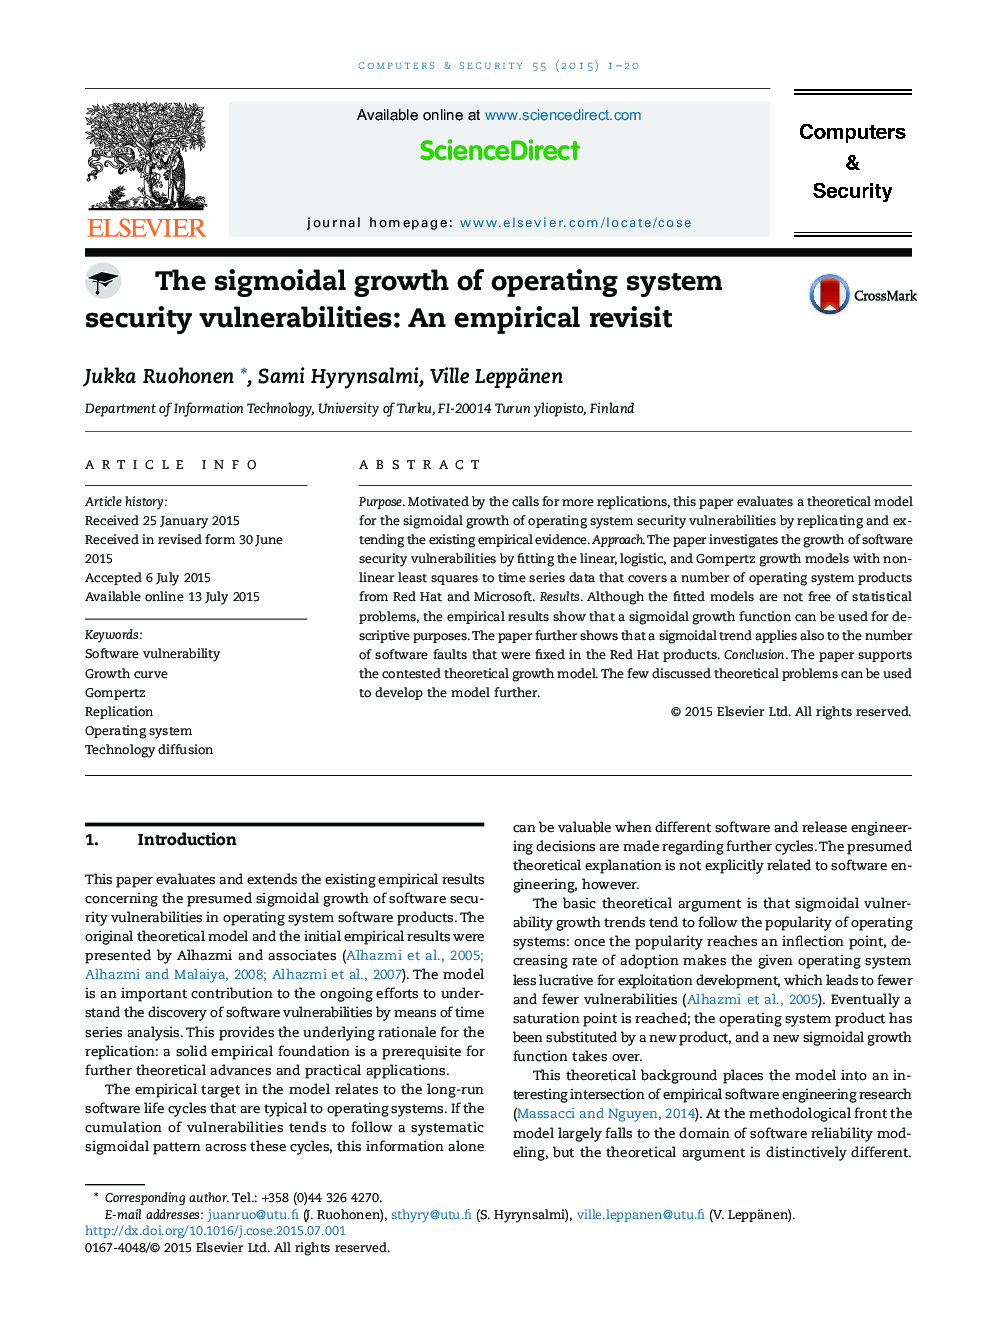 The sigmoidal growth of operating system security vulnerabilities: An empirical revisit